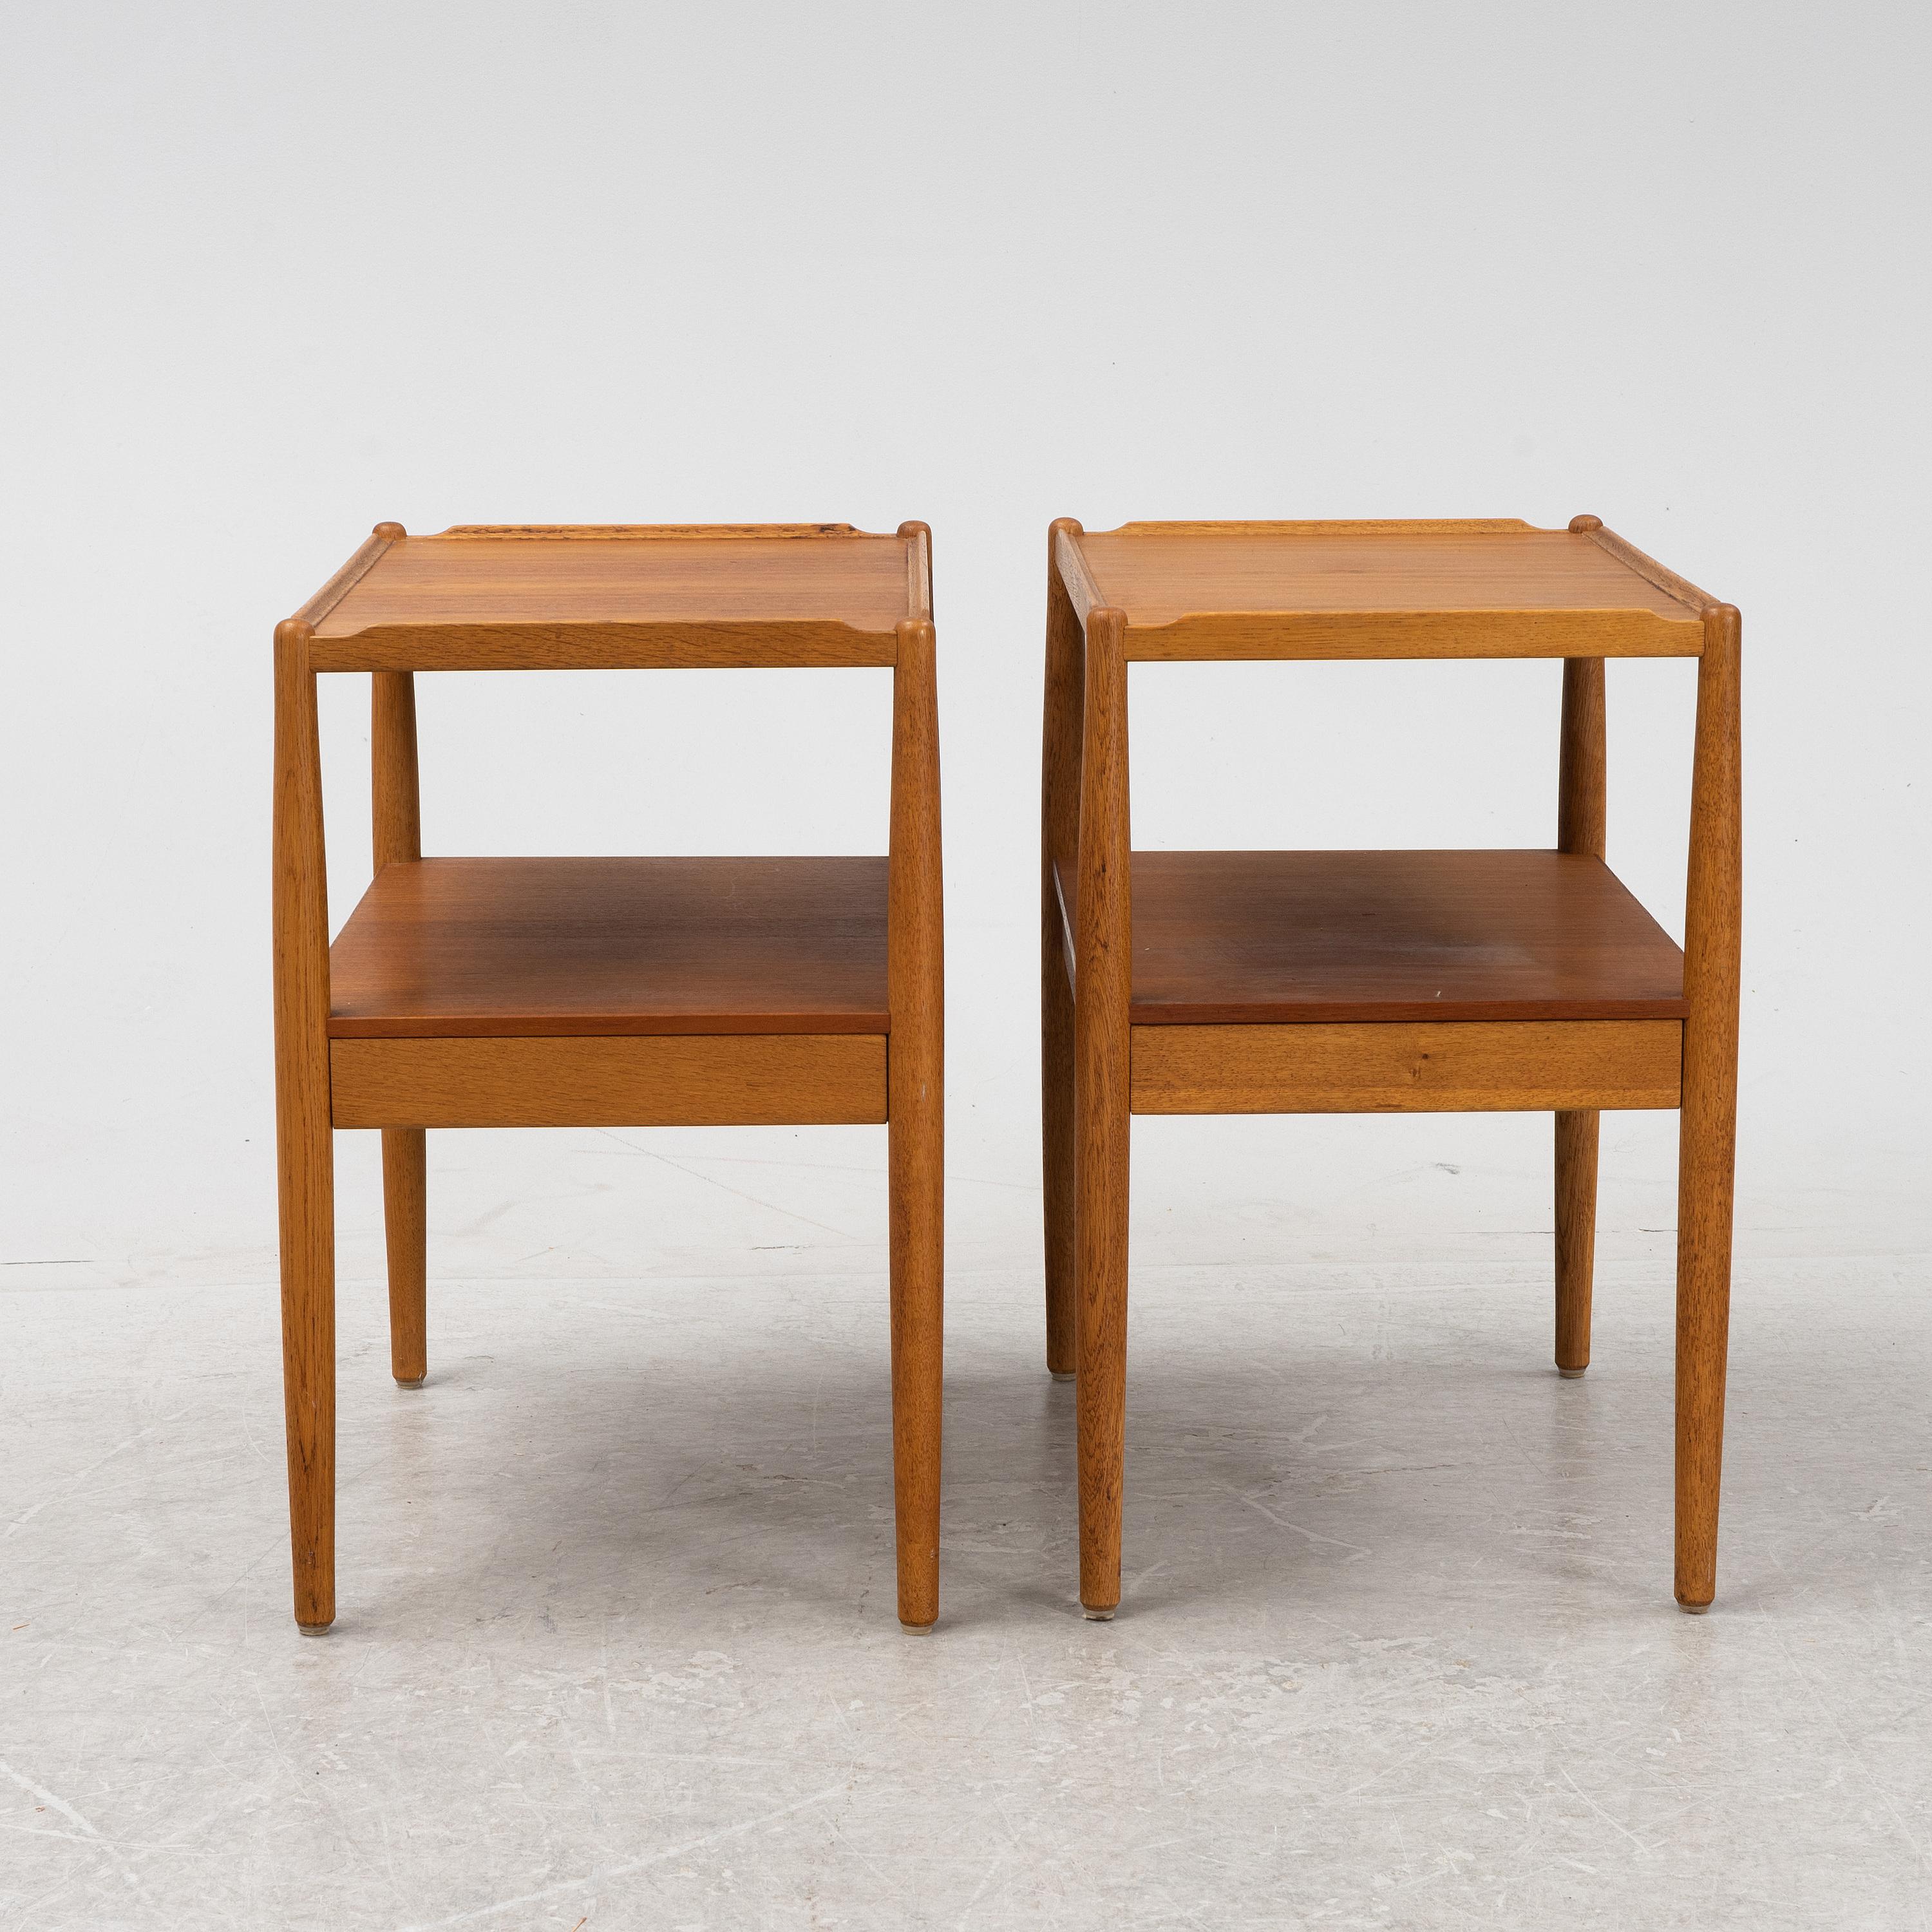 A pair of Swedish bedside tables, 